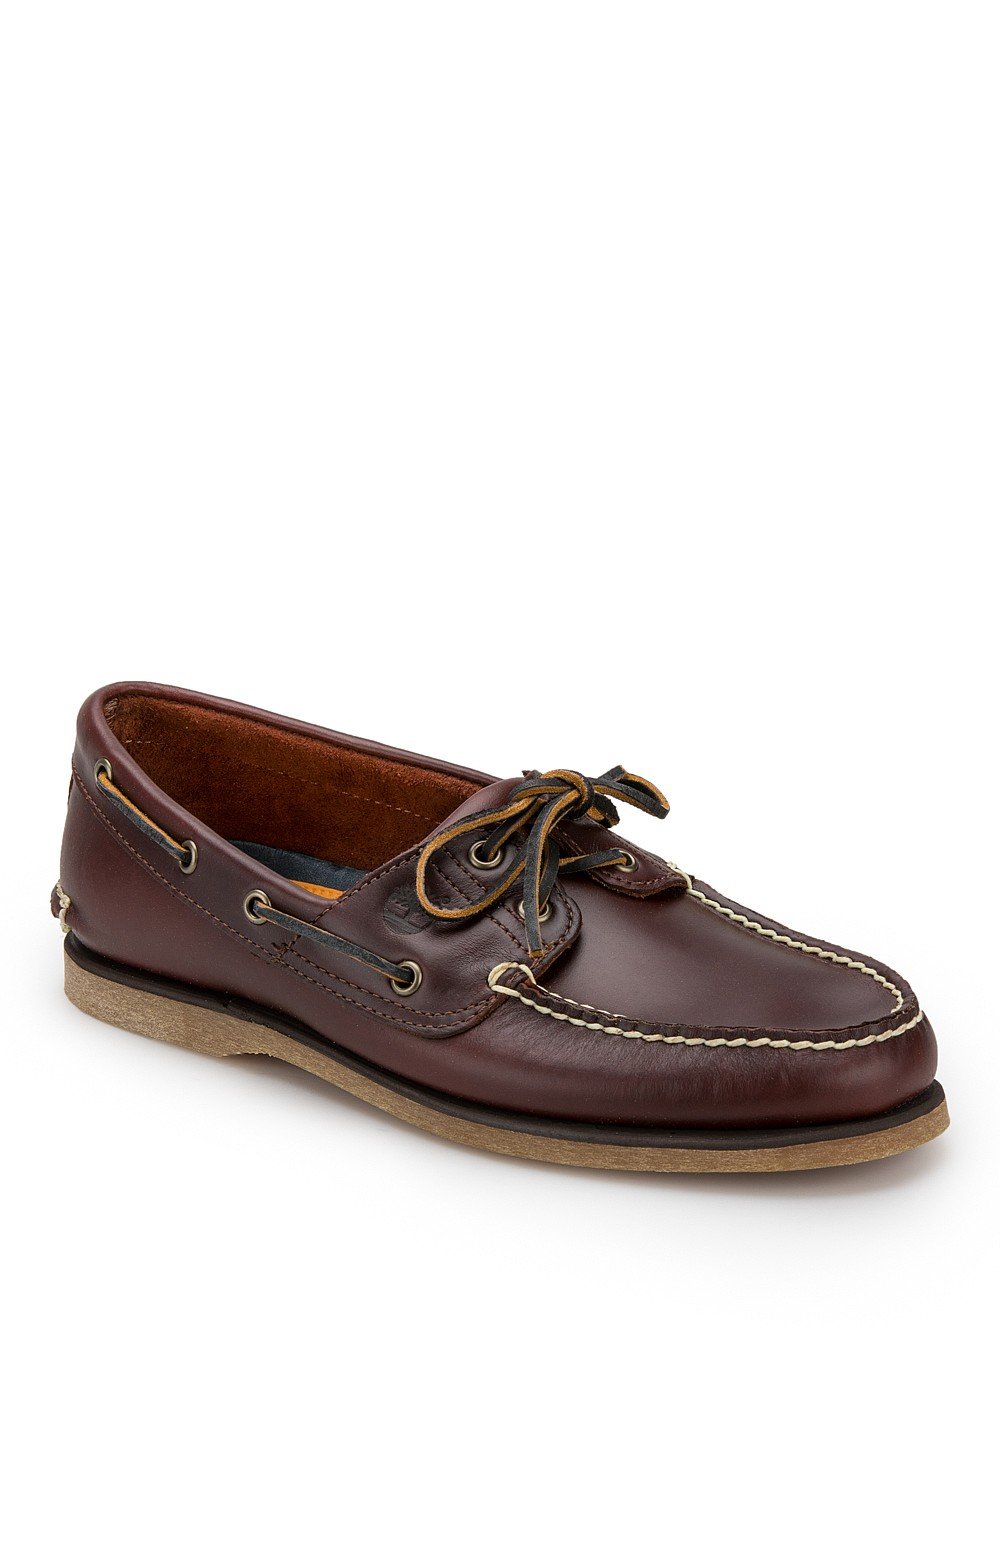 mens timberland boat shoes